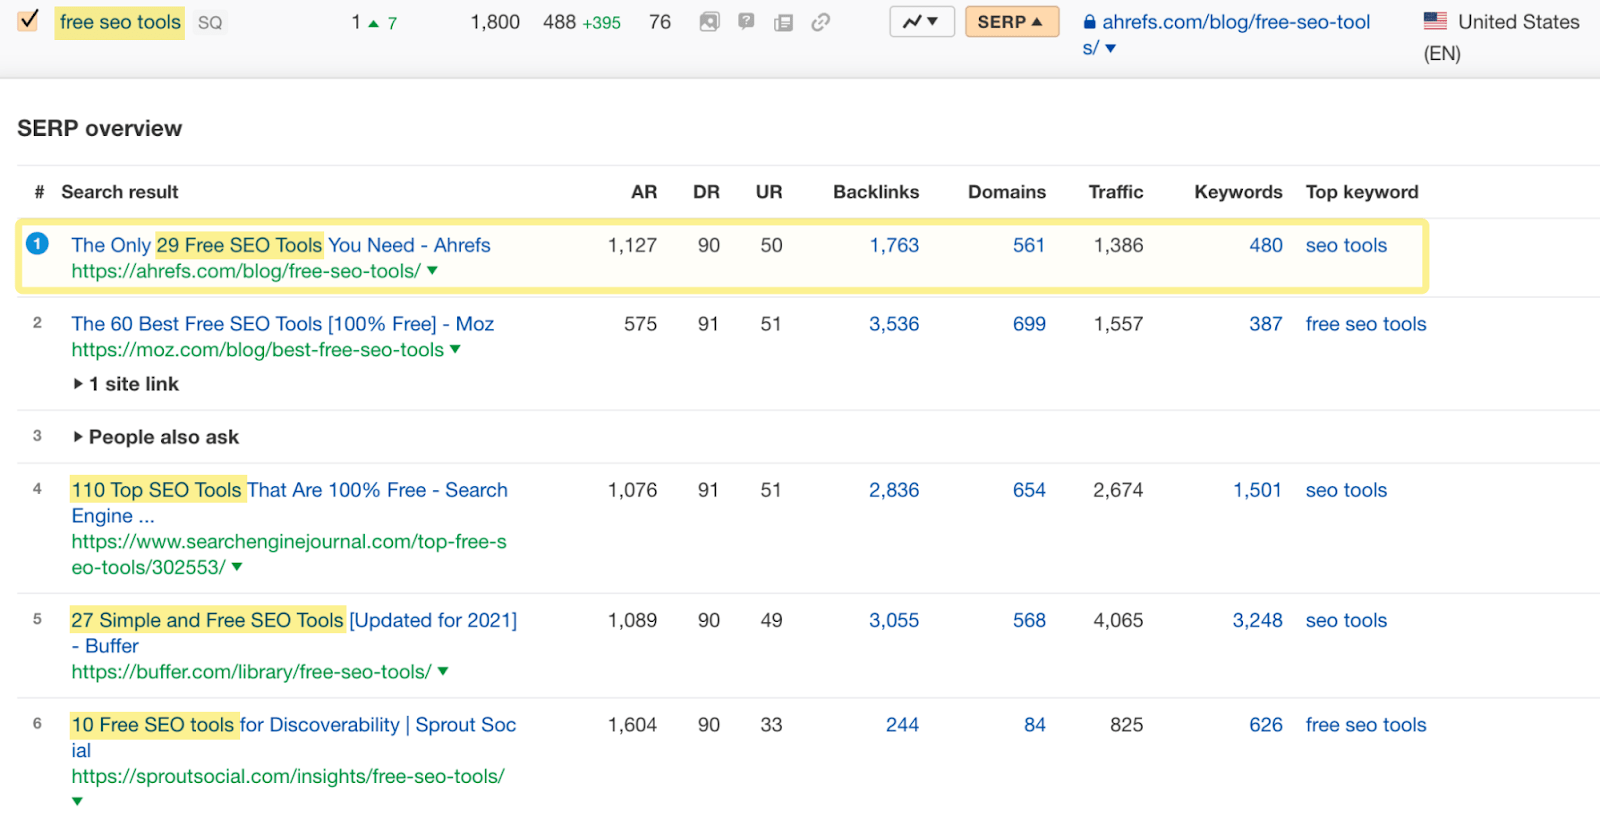 List of results in SERP overview showing Google prefers articles listing free SEO tools